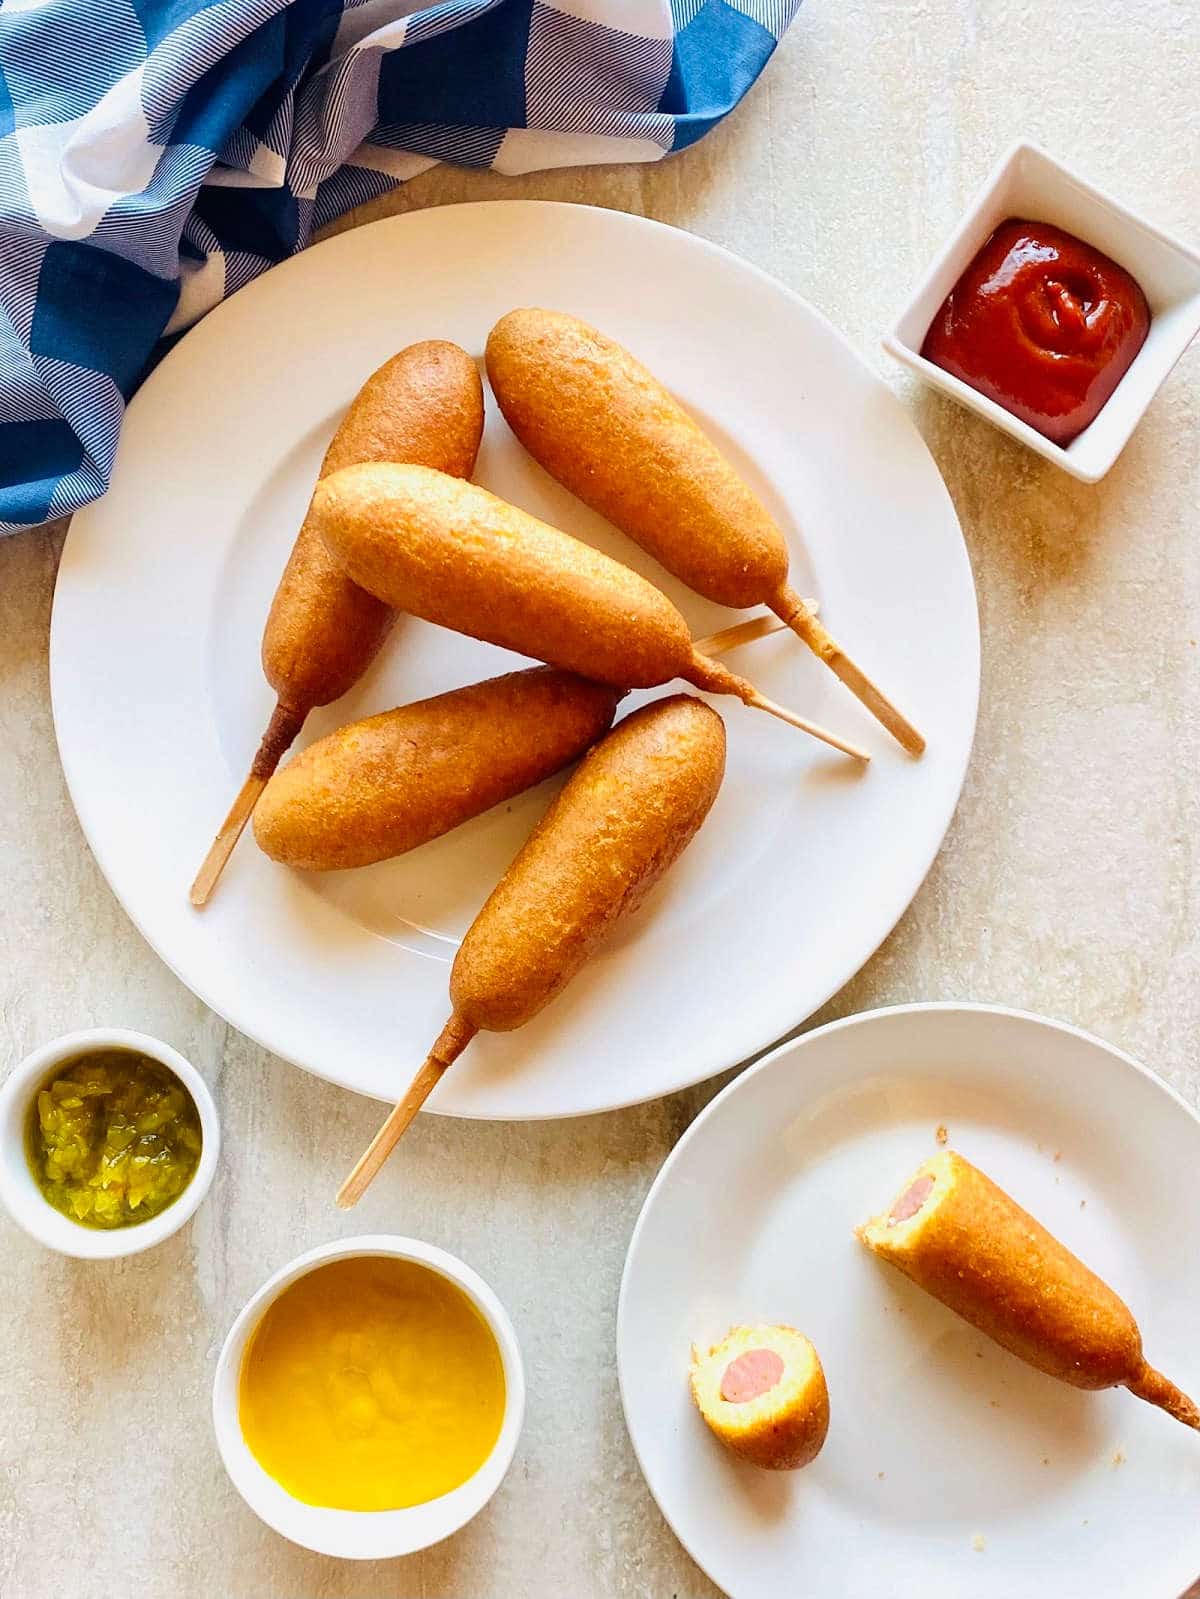 air fryer corn dogs on a plate next to ketchup, mustard and relish